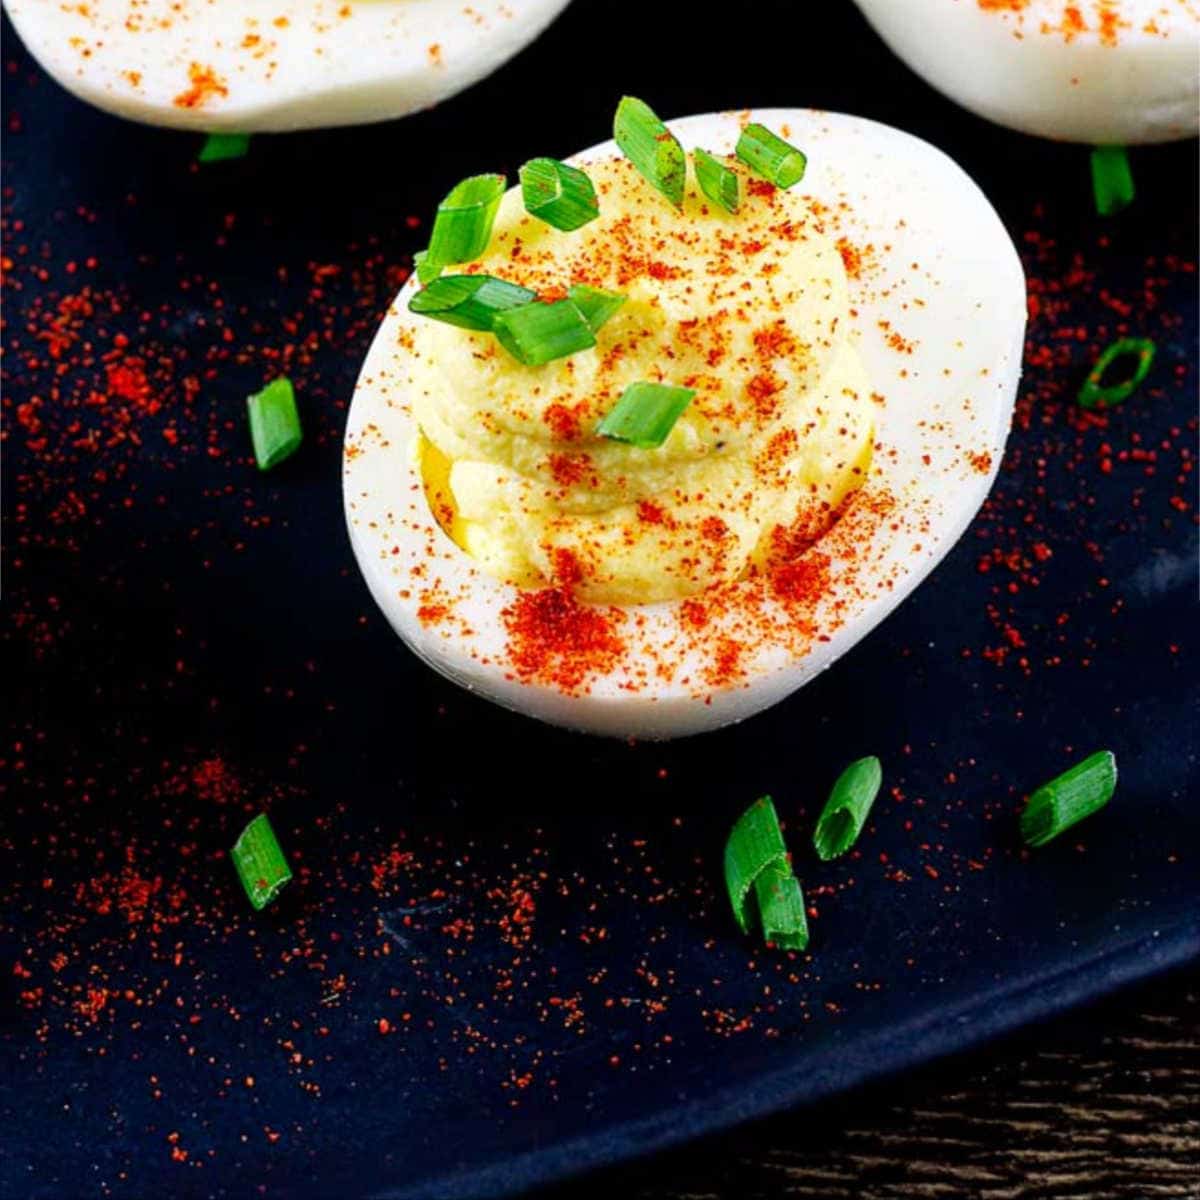 deviled egg with paprika and chopped chives garnish on a black plate